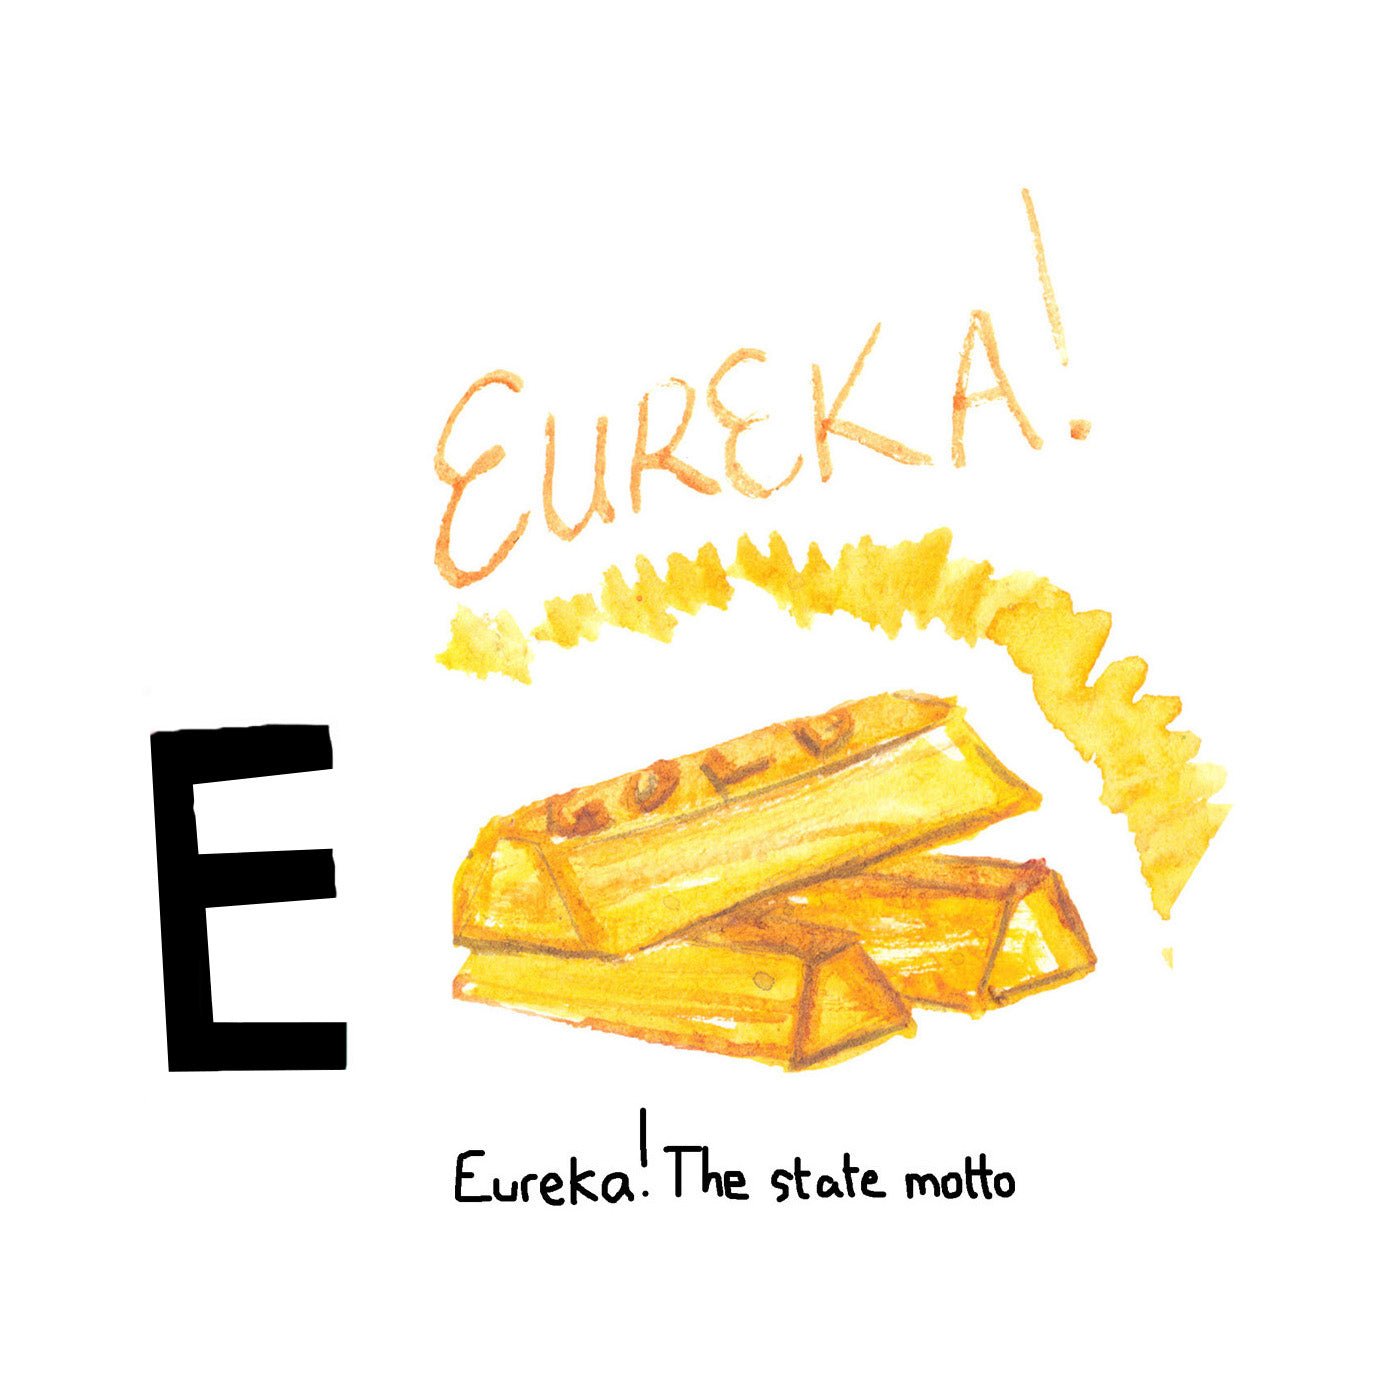 E is for Eureka. The state motto expressing discovery, harkening back to the Gold Rush days